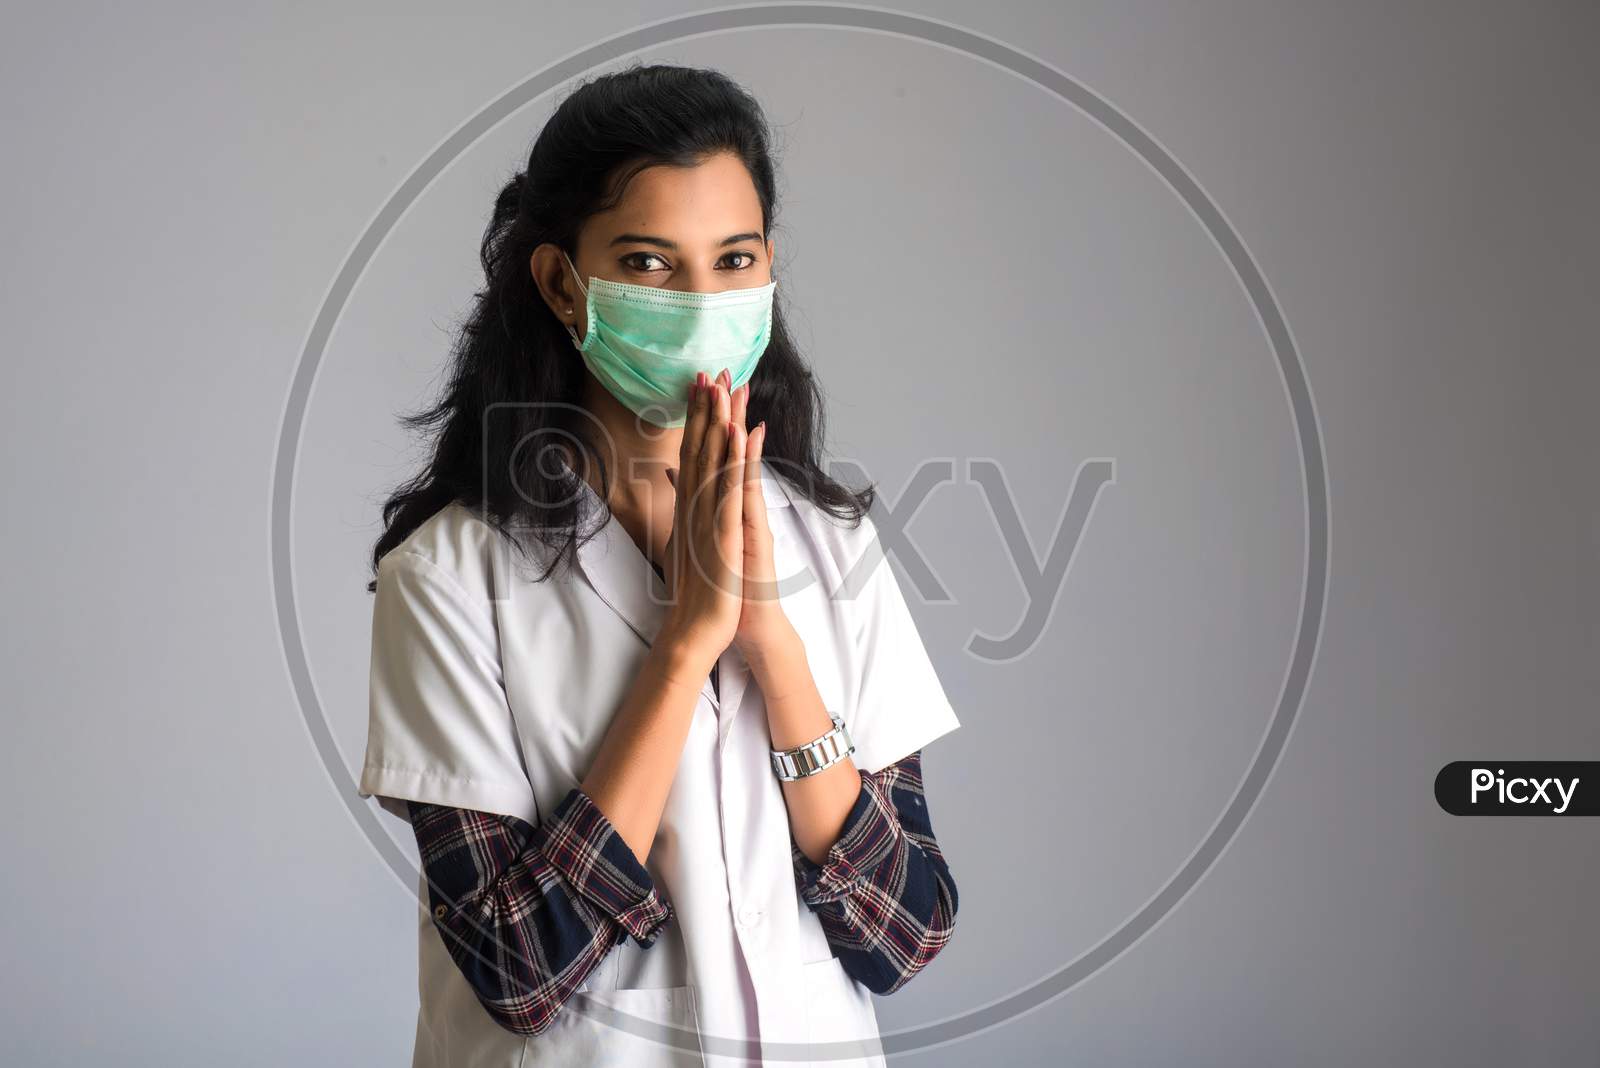 Young Woman Doctor Doing Namaste Because Of Outbreak Of Covid-19. New Greeting To Avoid The Spread Of Coronavirus Instead Of Greeting With A Hug Or Handshake.